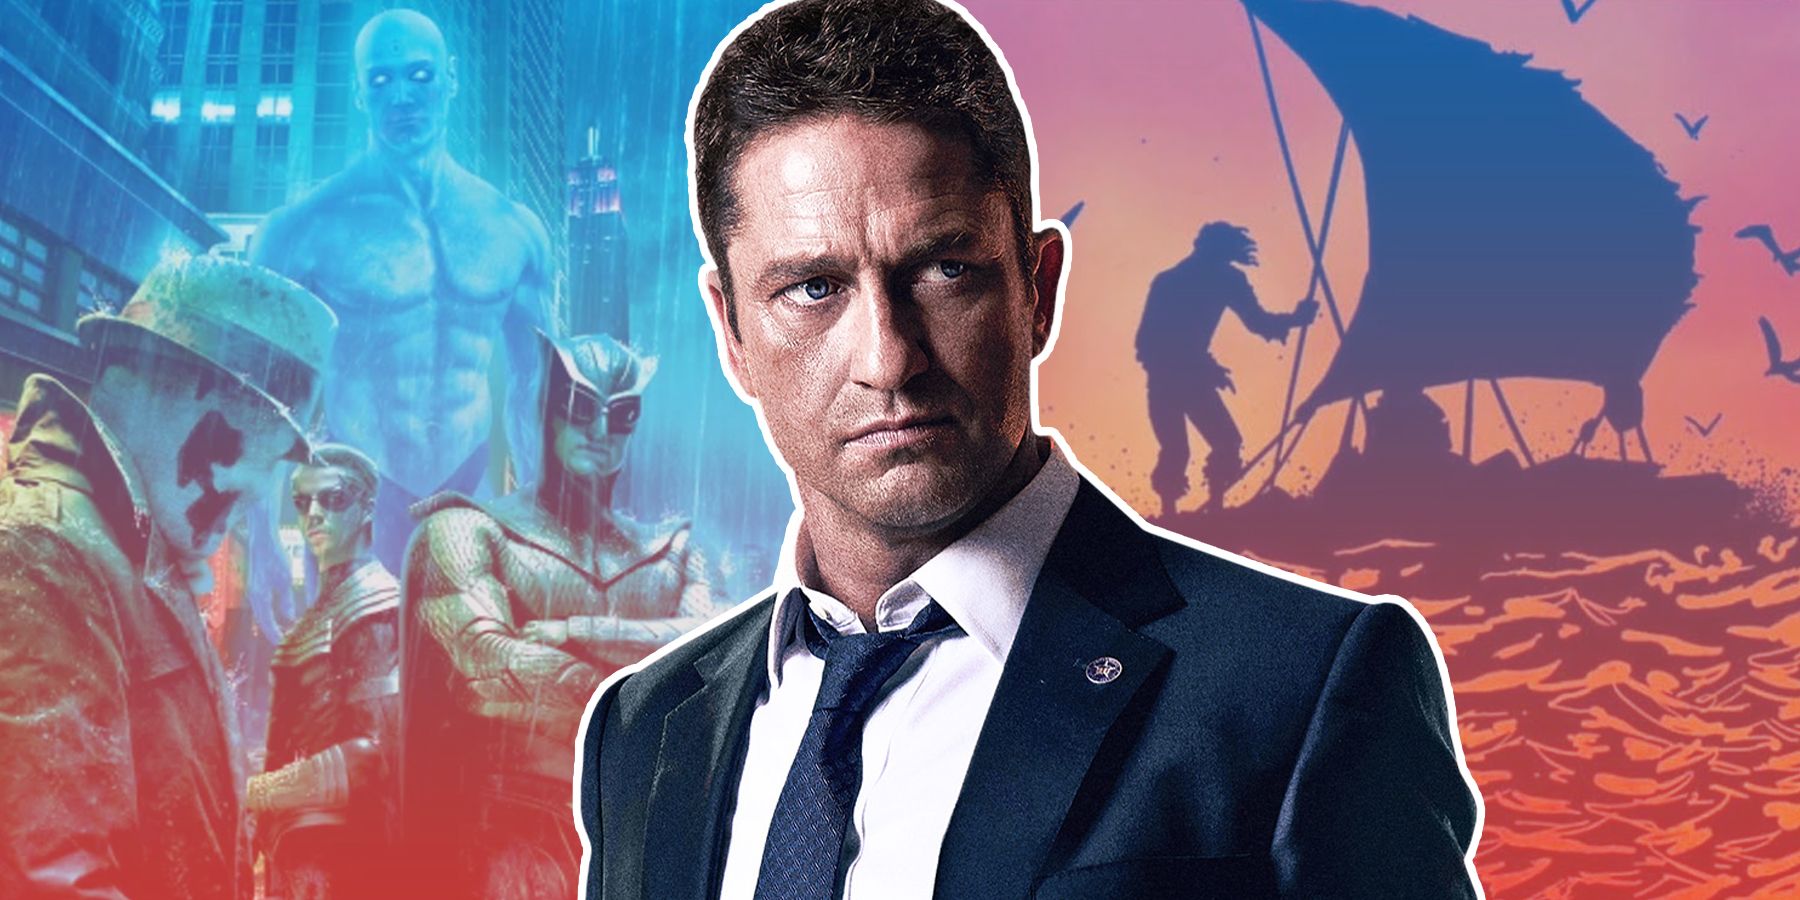 Who Does Gerard Butler Play in Zack Snyder's Watchmen